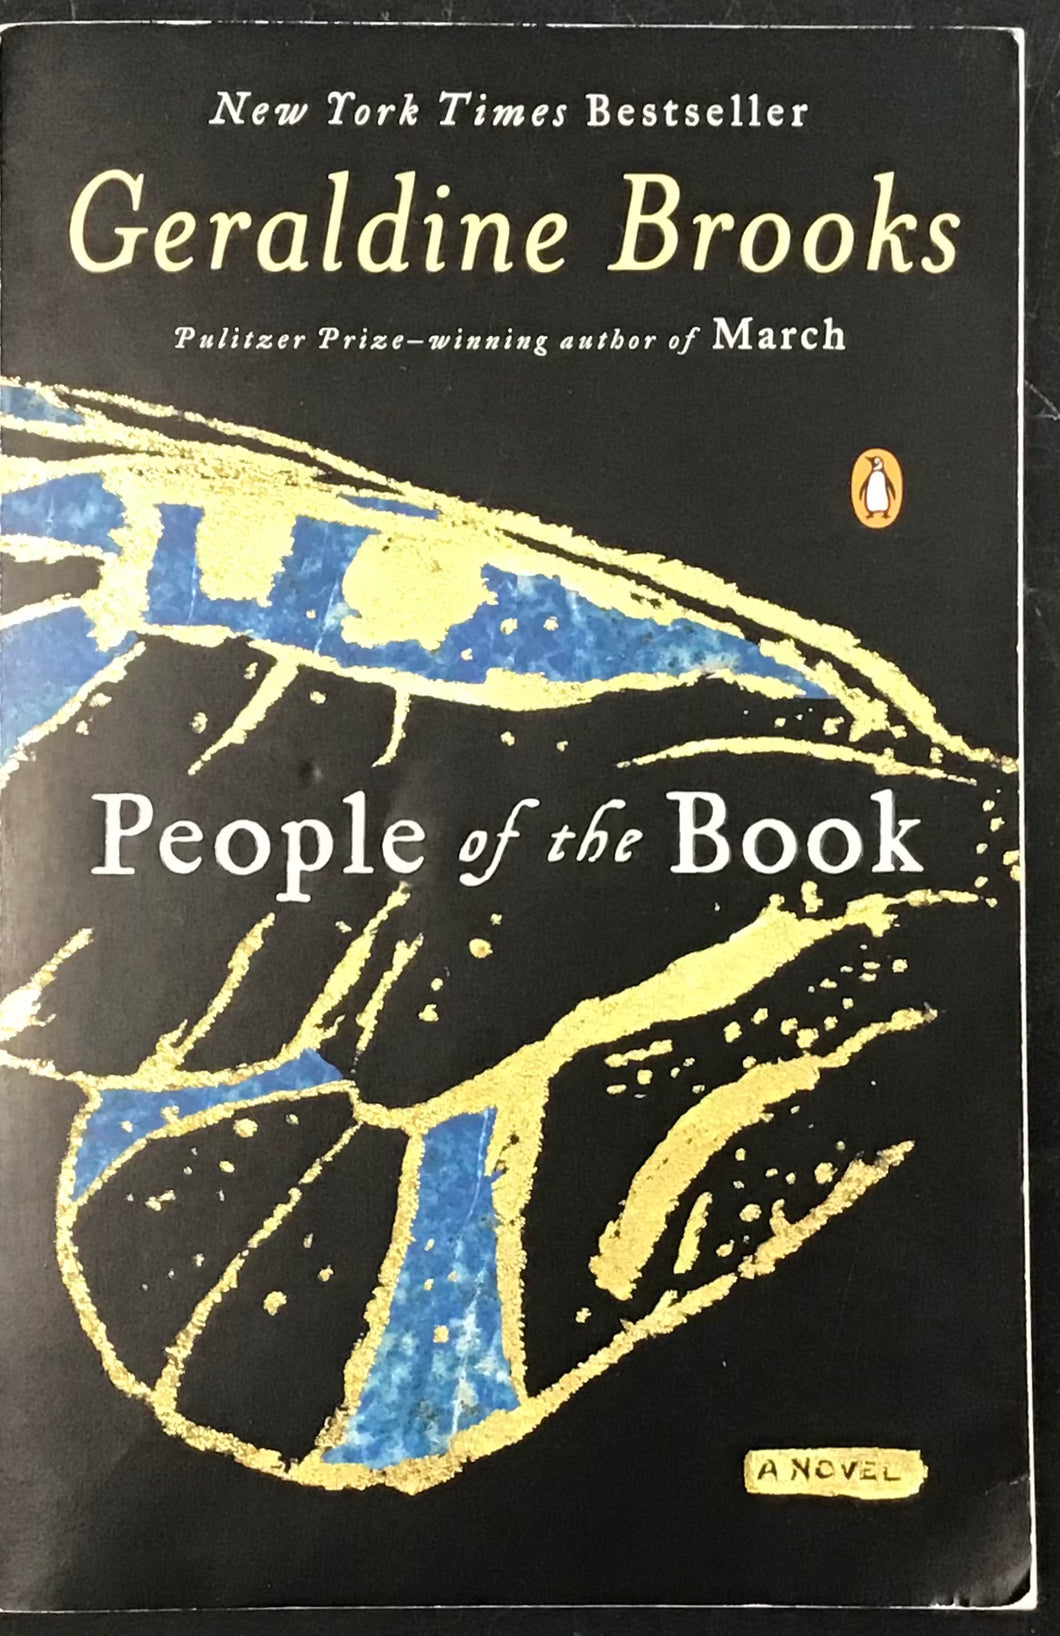 People of the Book, by Geraldine Brooks